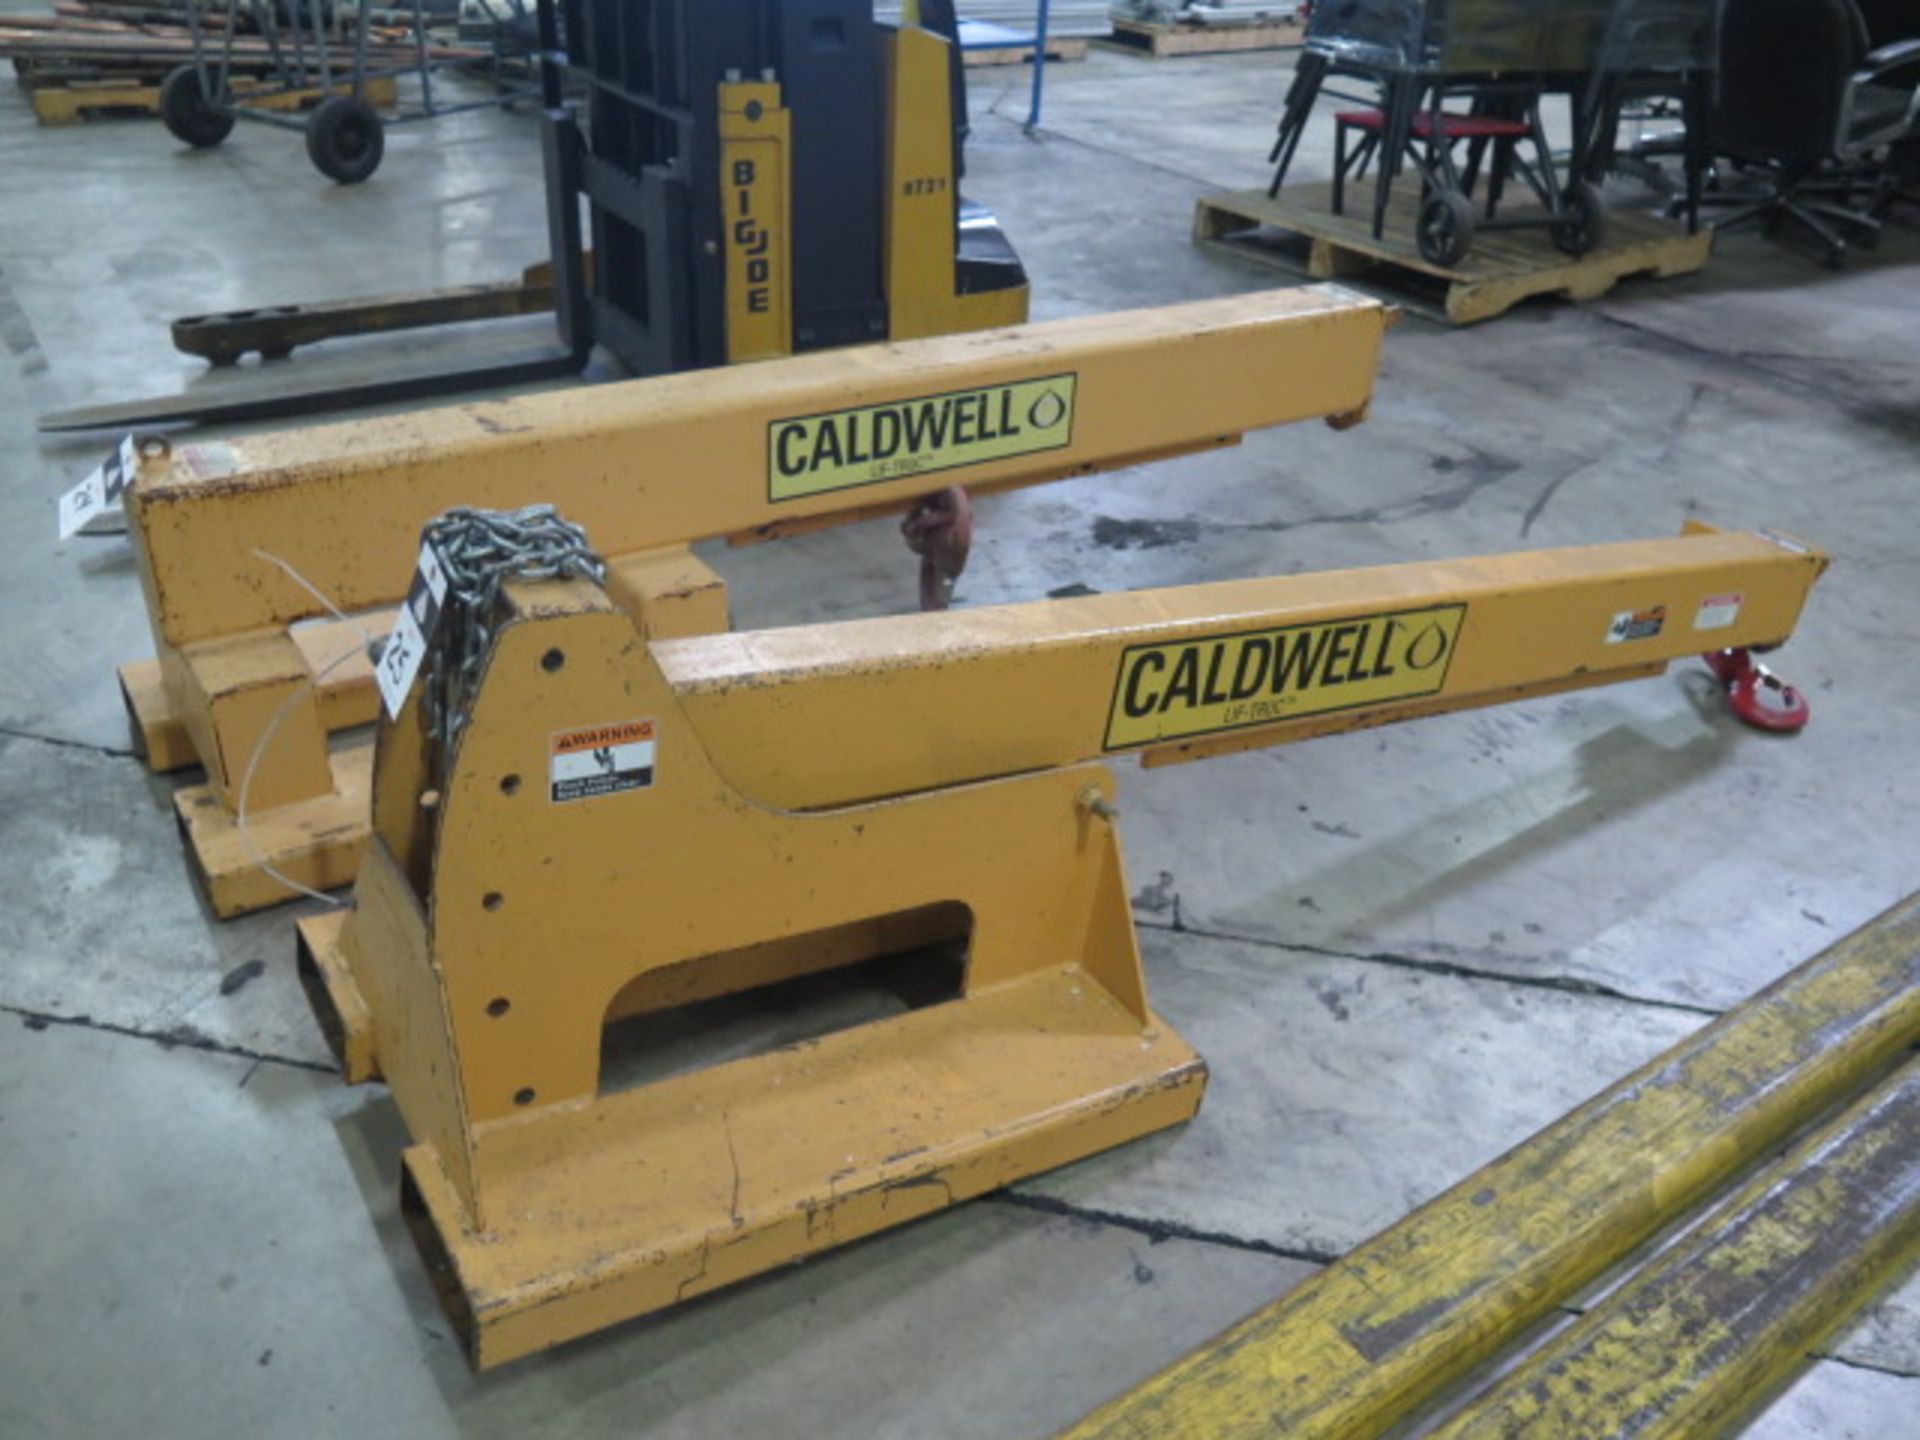 Caldwell PB-40 4000 Lb Forklift Jib Attachment s/n 47-32-0000110, SOLD AS IS WITH NO WARRANTY - Image 2 of 6